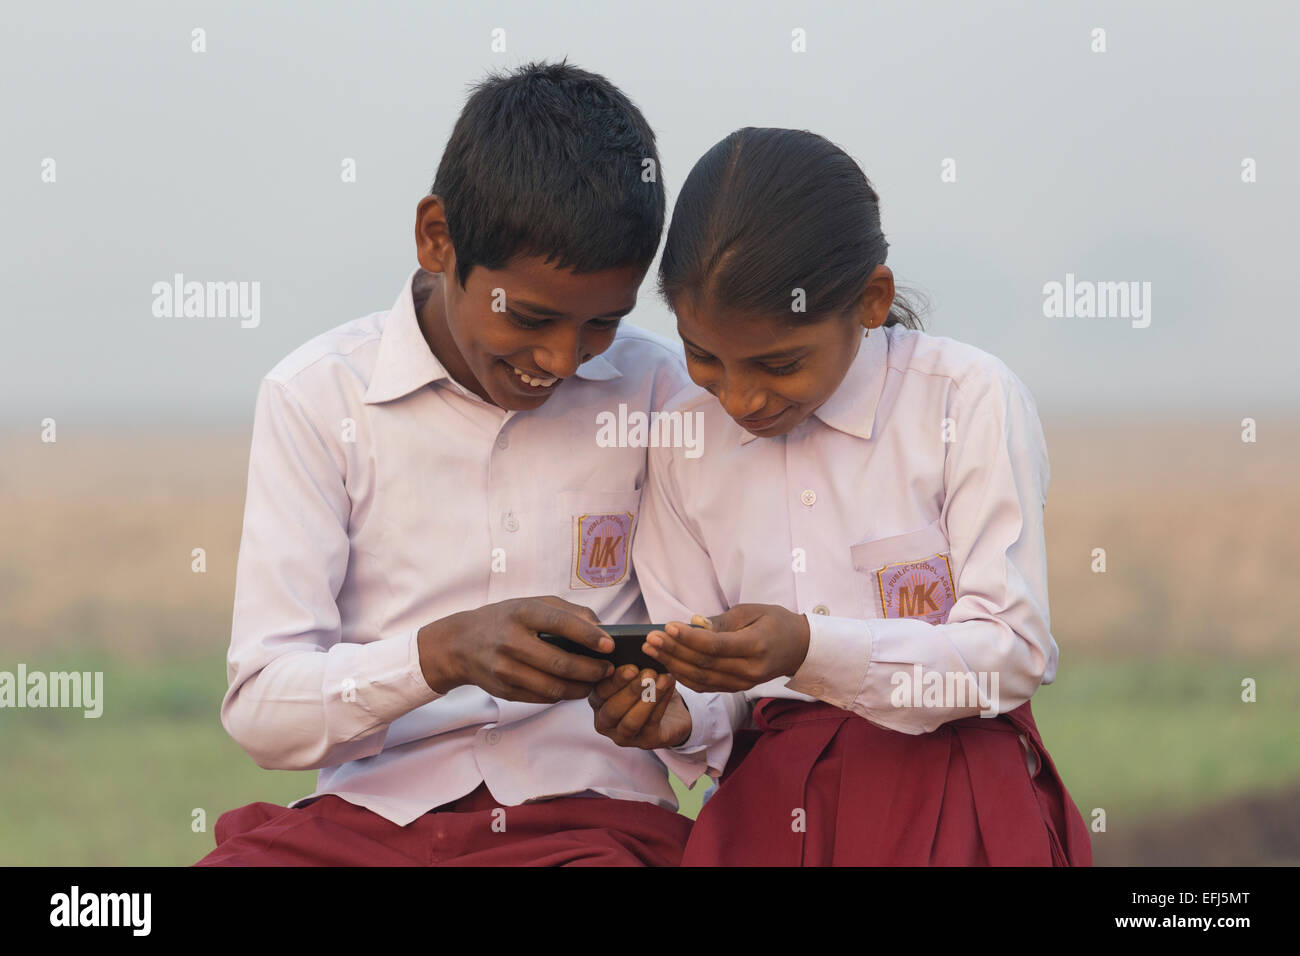 India, Uttar Pradesh, Agra, Indian  village boy and girl  looking at photos on a smartphone Stock Photo